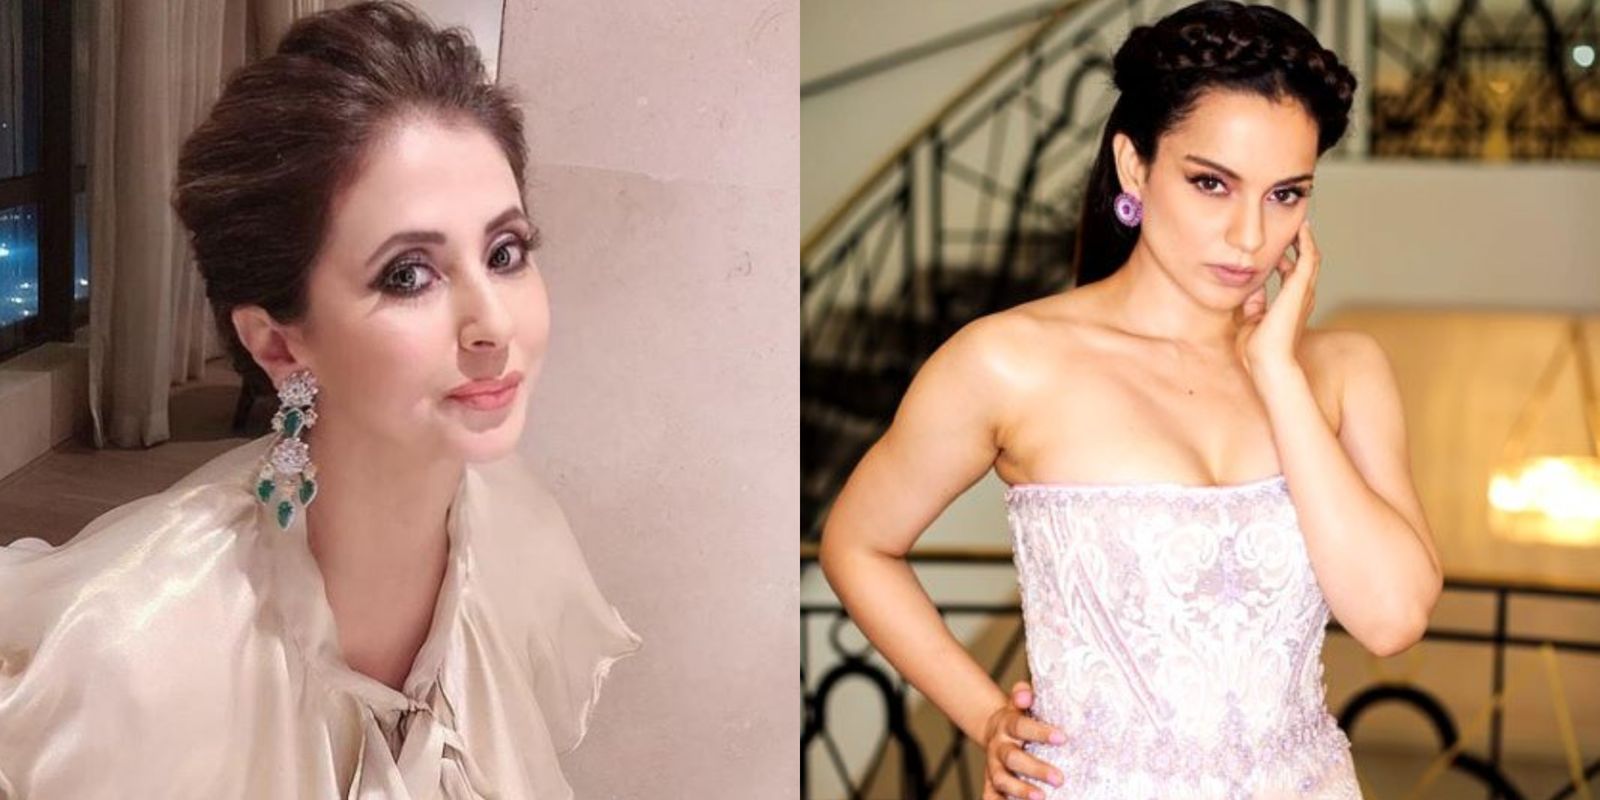 Urmila Matondkar Says Sorry For Calling Kangana 'Rudali' In The Past, Doesn't Understand Why She Plays The Victim Card